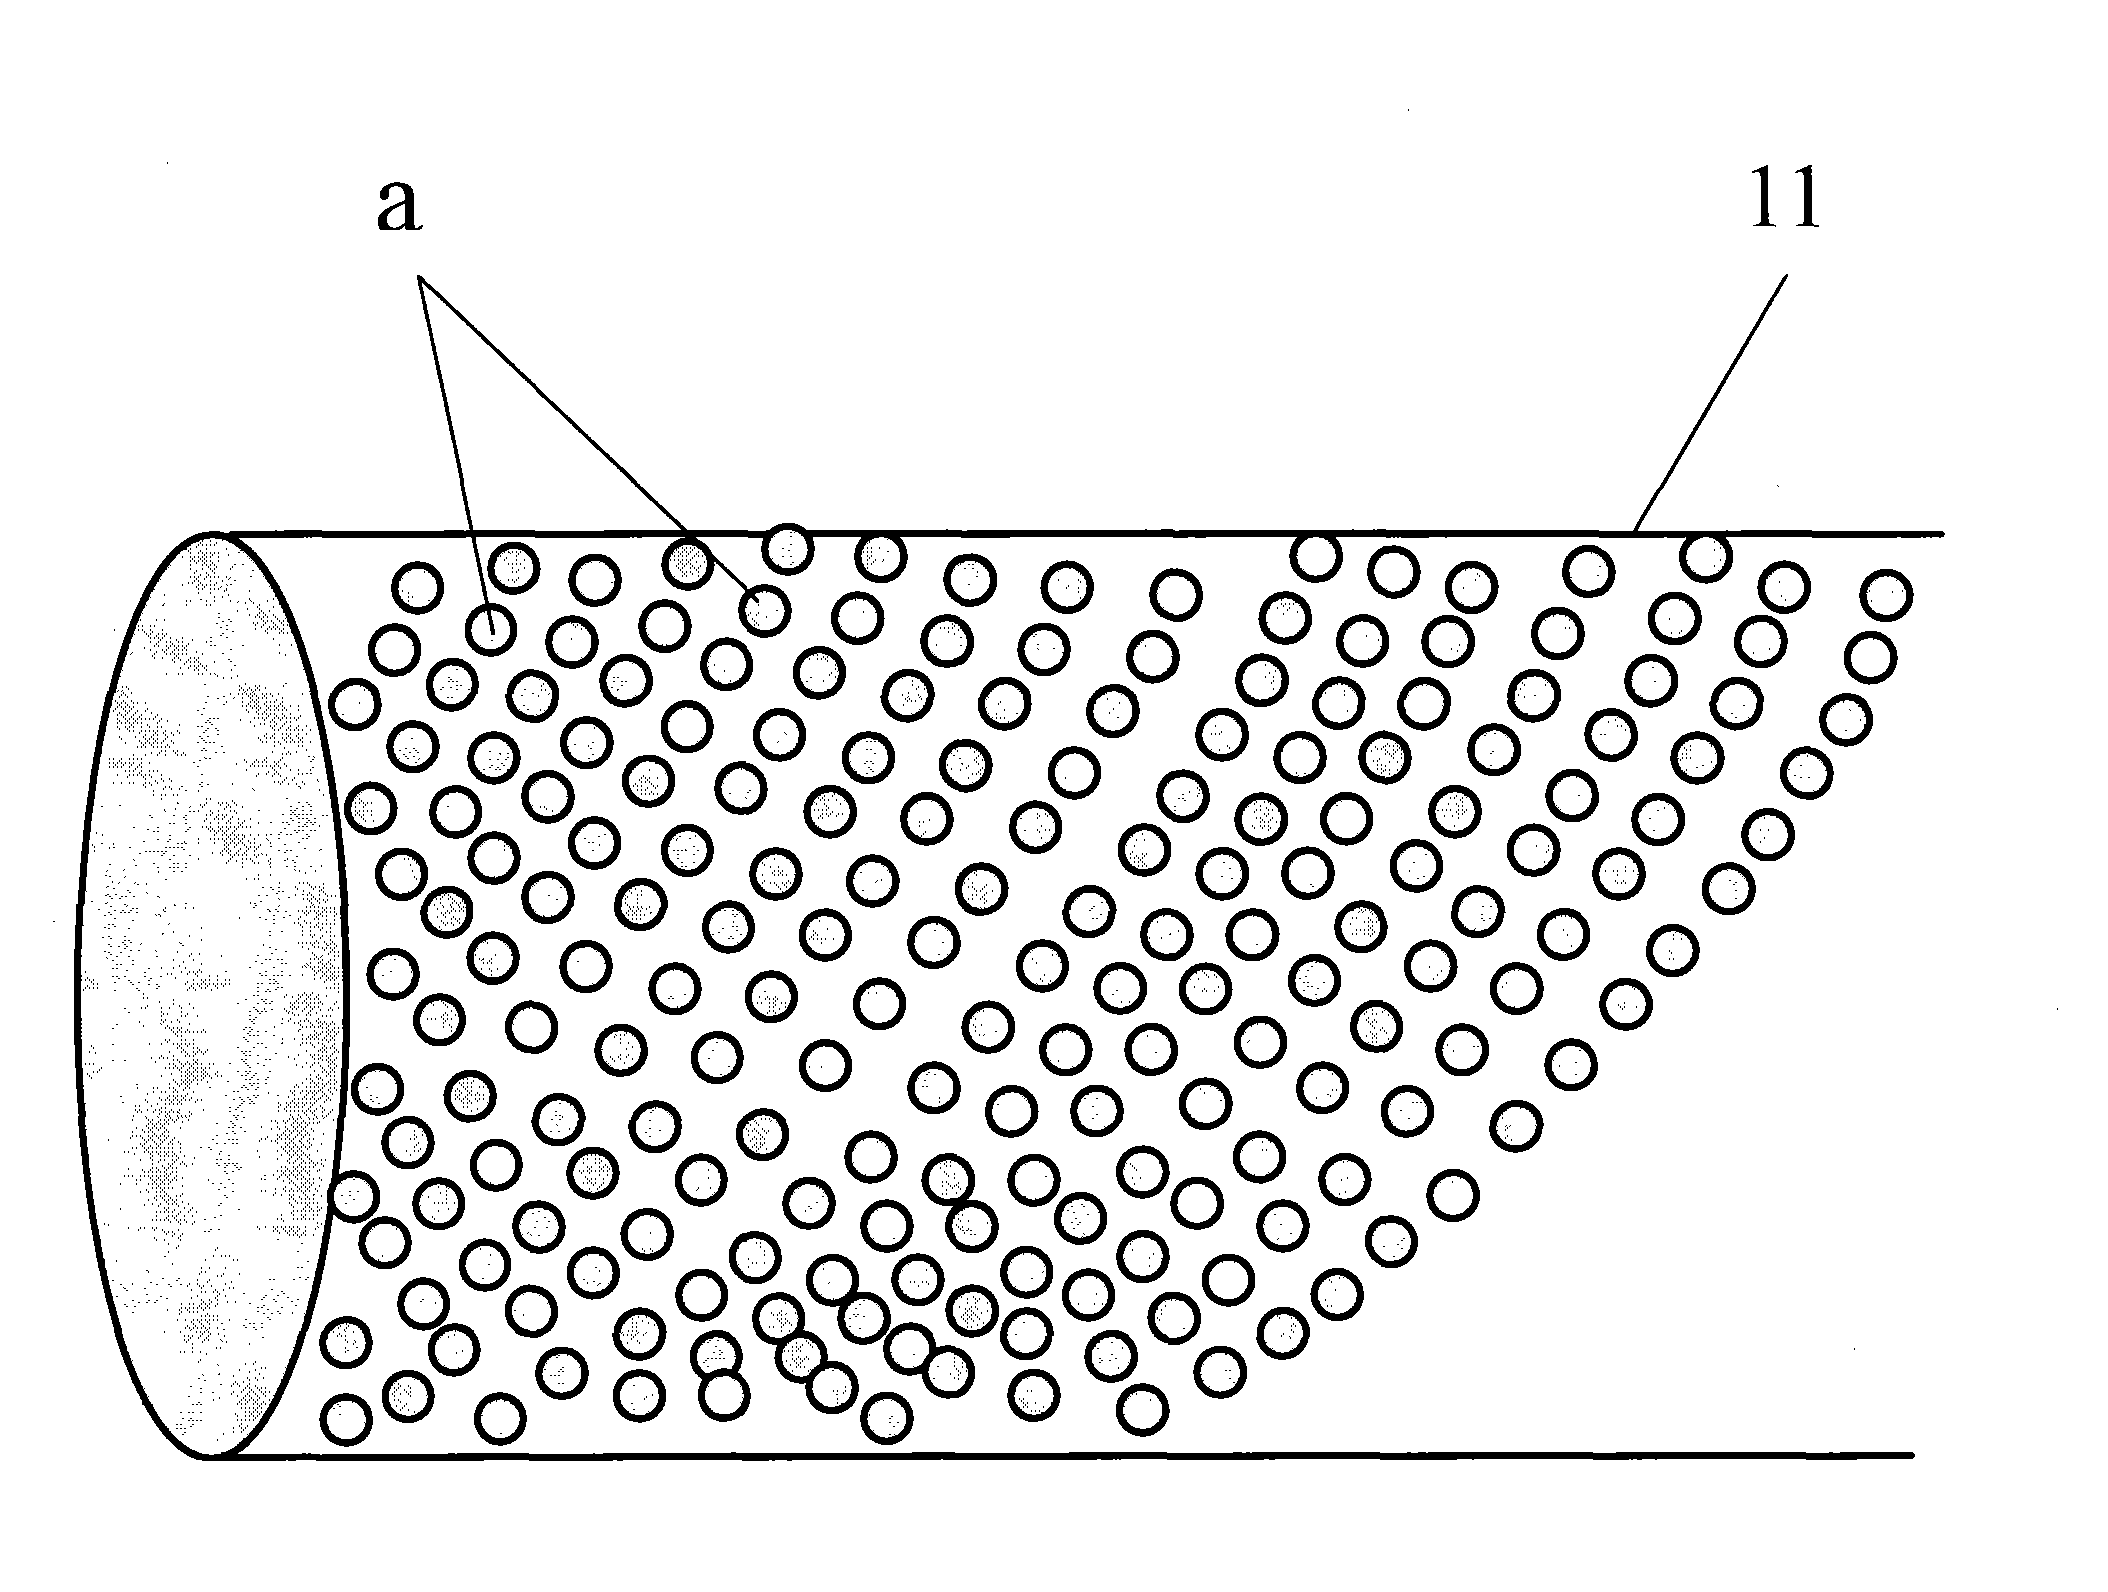 Laser texturing processing method on surface of roller